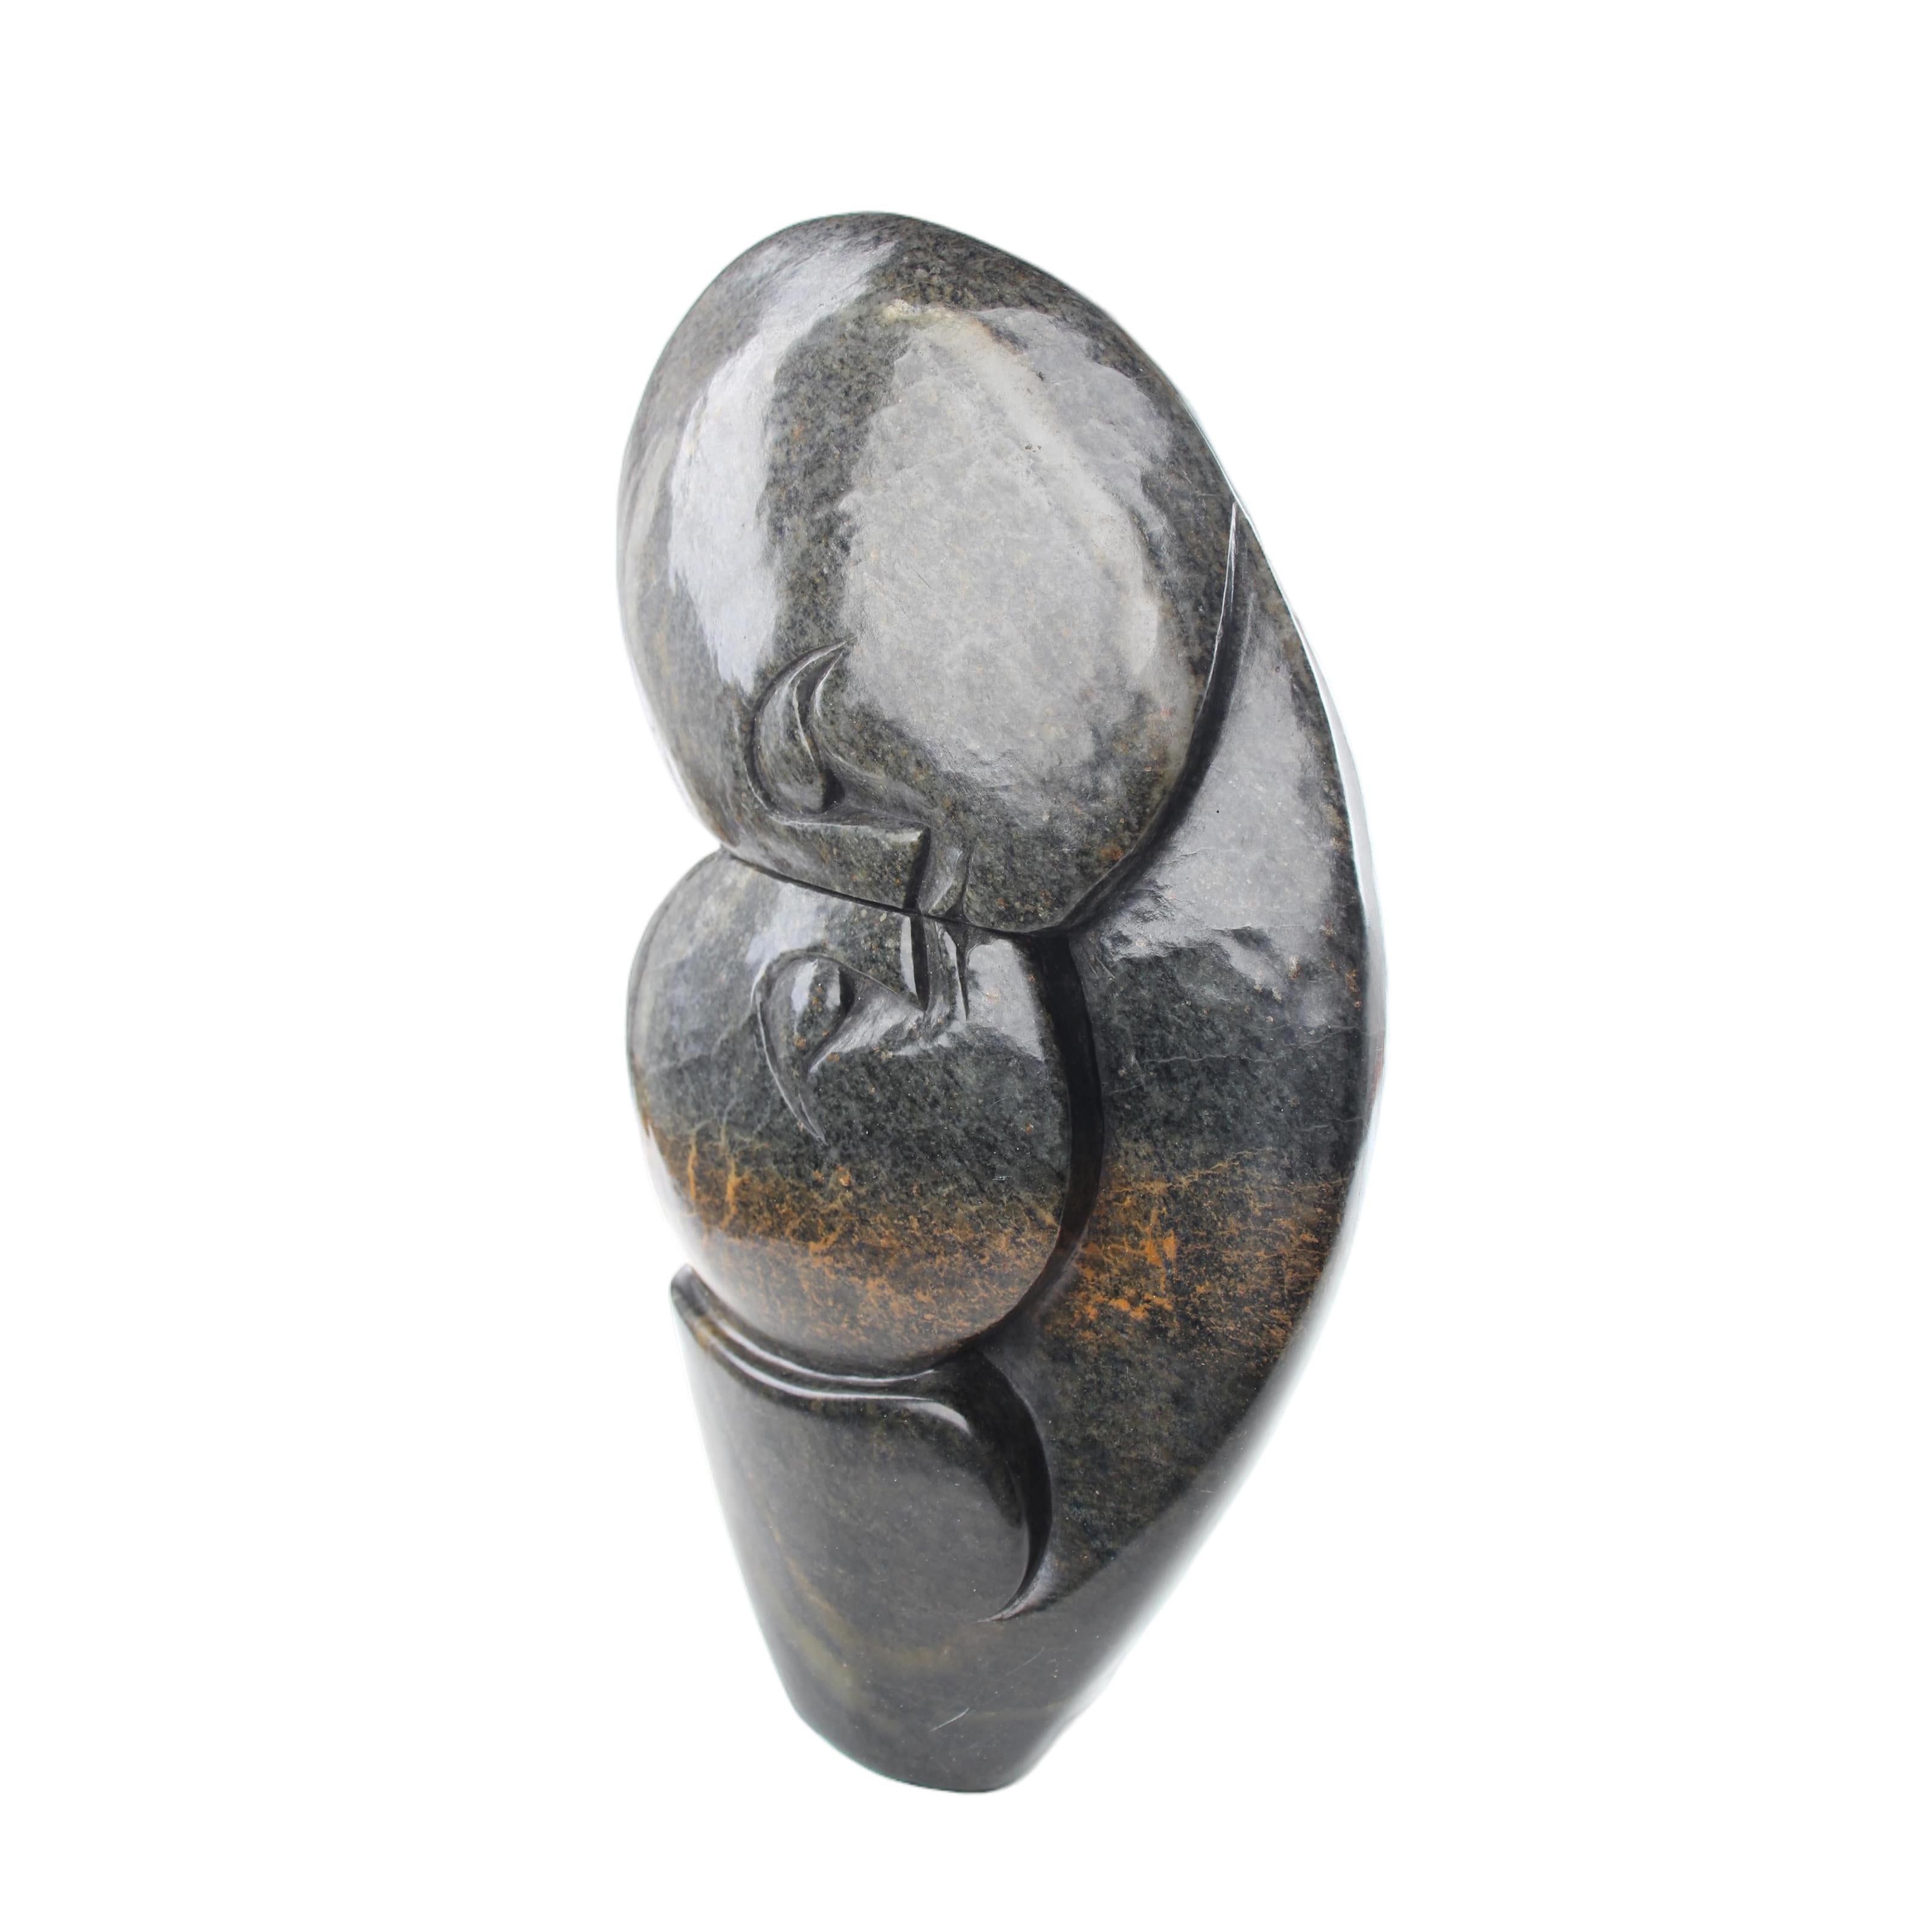 Shona Tribe Serpentine Stone Lovers ~14.2" Tall - Lovers